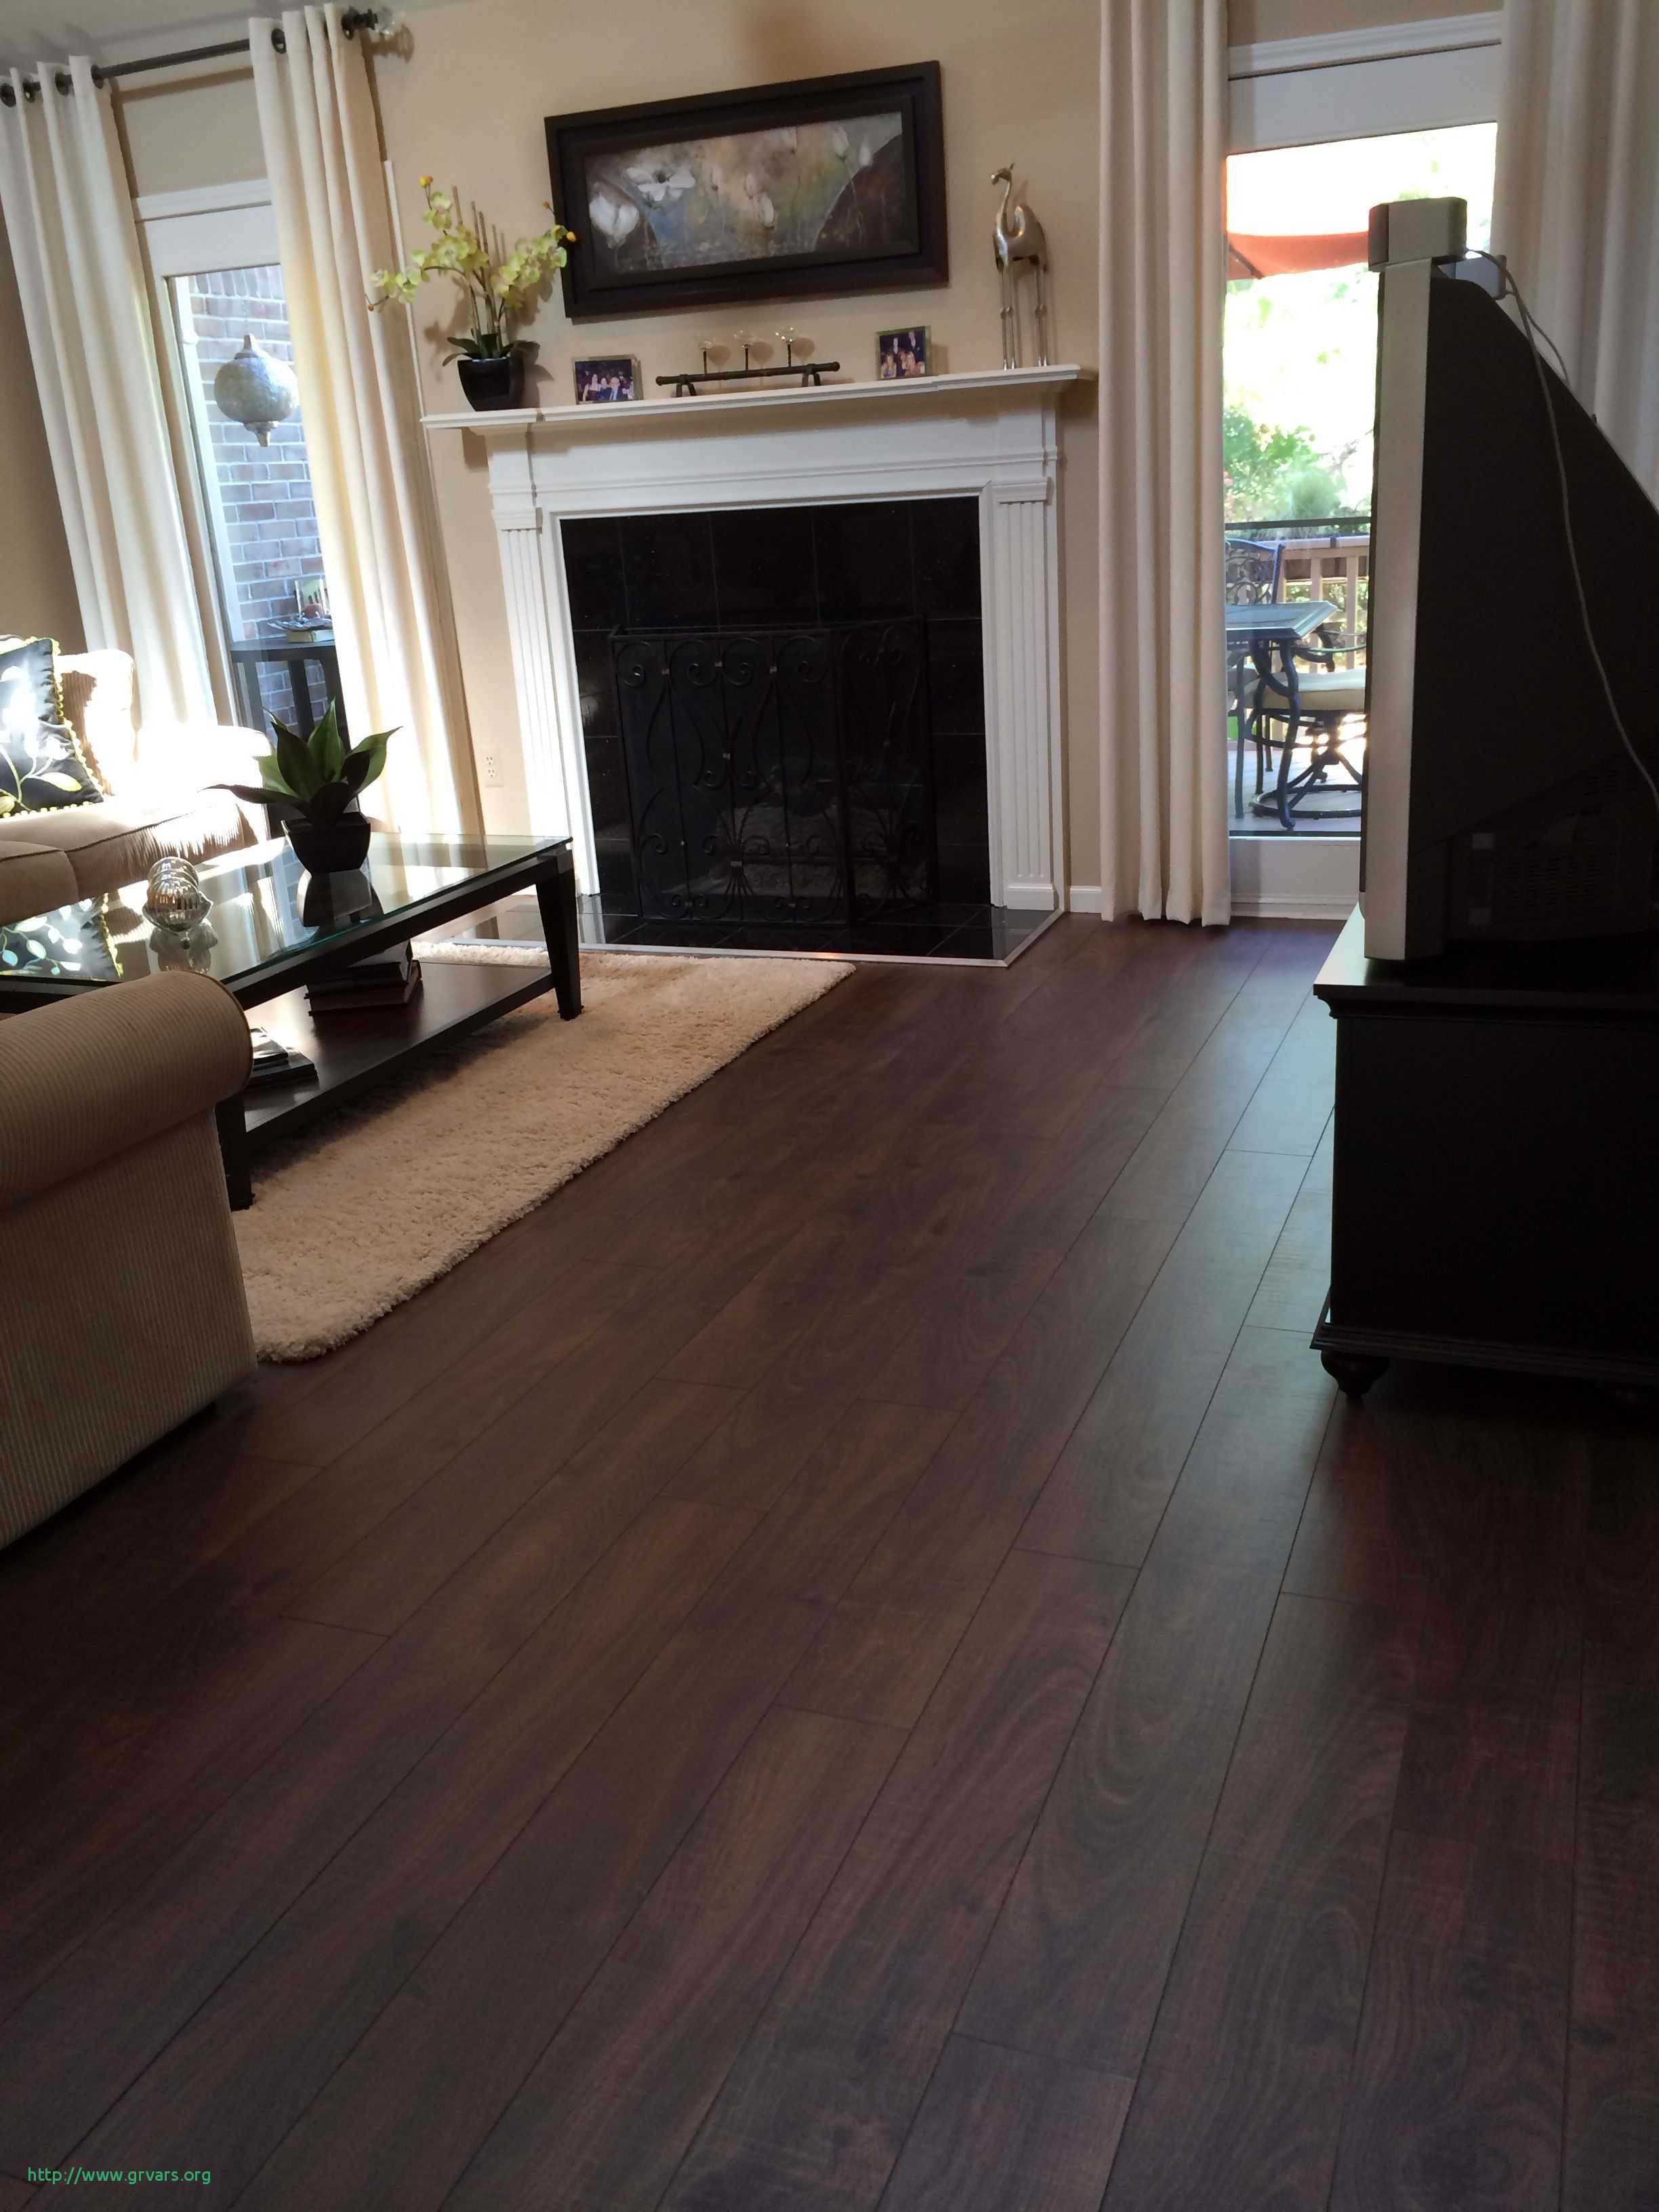 12 Fabulous Hardwood Floor Mop Reviews 2024 free download hardwood floor mop reviews of 24 luxe floors for less reviews ideas blog with regard to pergo flooring lovely s media cache ak0 pinimg 736x 43 0d 97 inspiration of how to